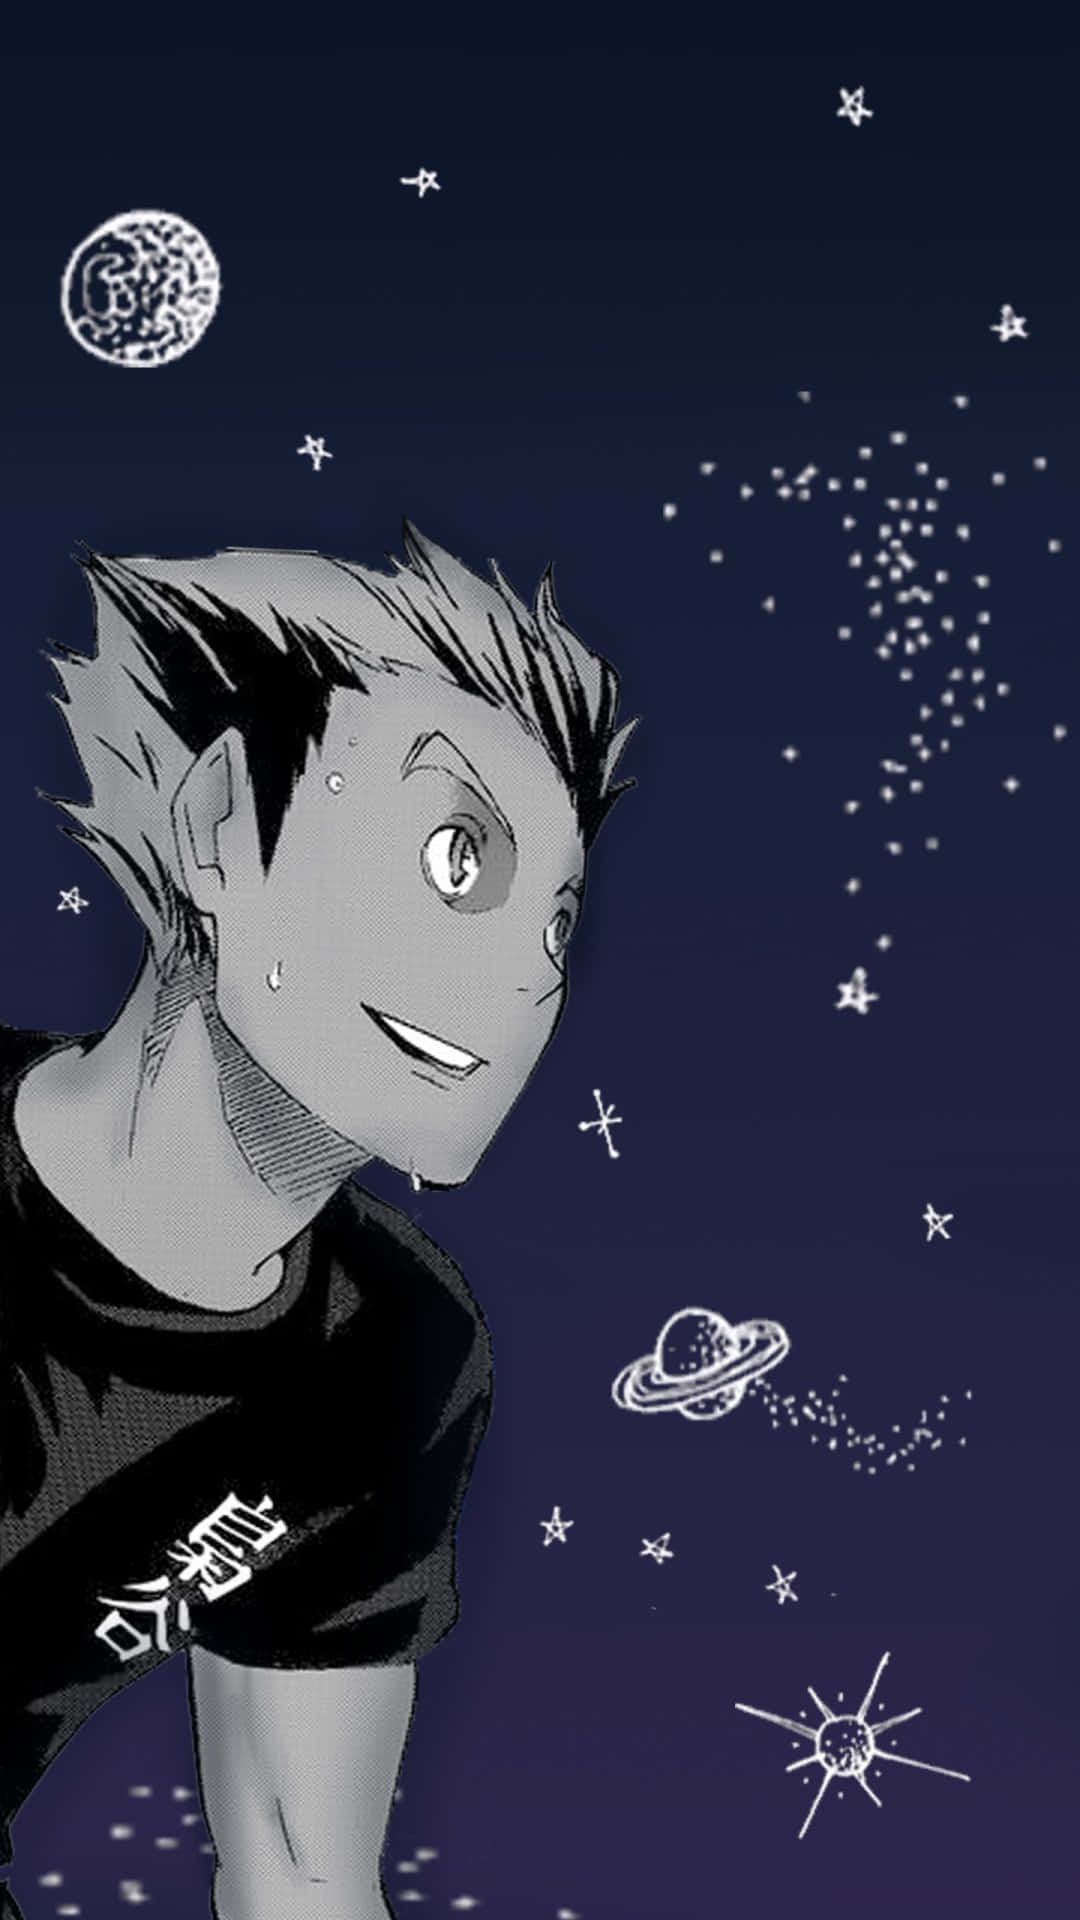 Ktar Bokuto Stretching into the Distance Wallpaper